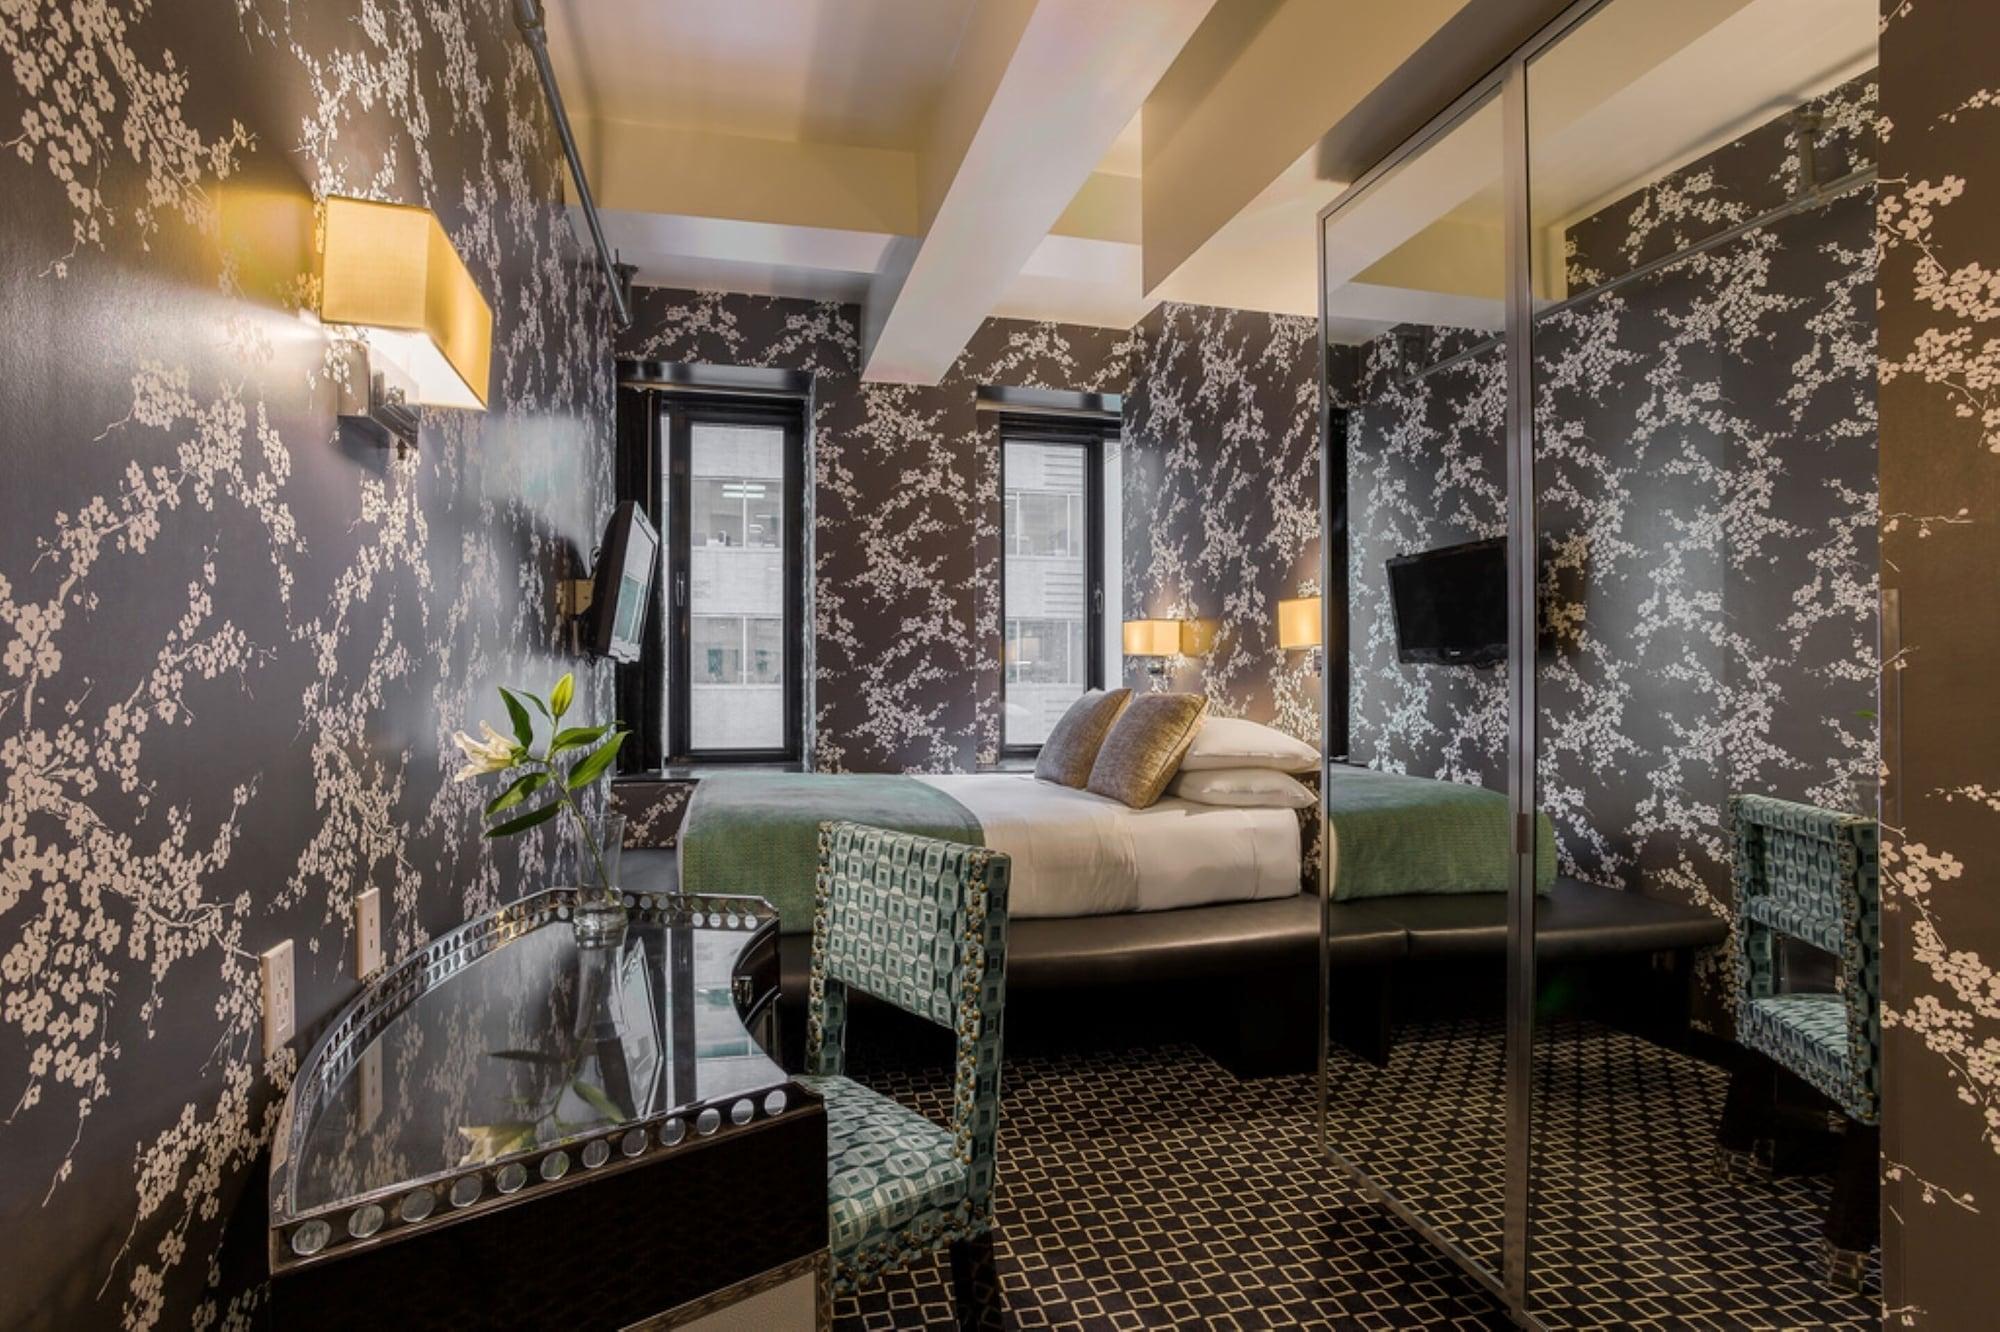 Kietelen lamp Monet ROOM MATE GRACE BOUTIQUE HOTEL NEW YORK, NY 3* (United States) - from US$  99 | BOOKED